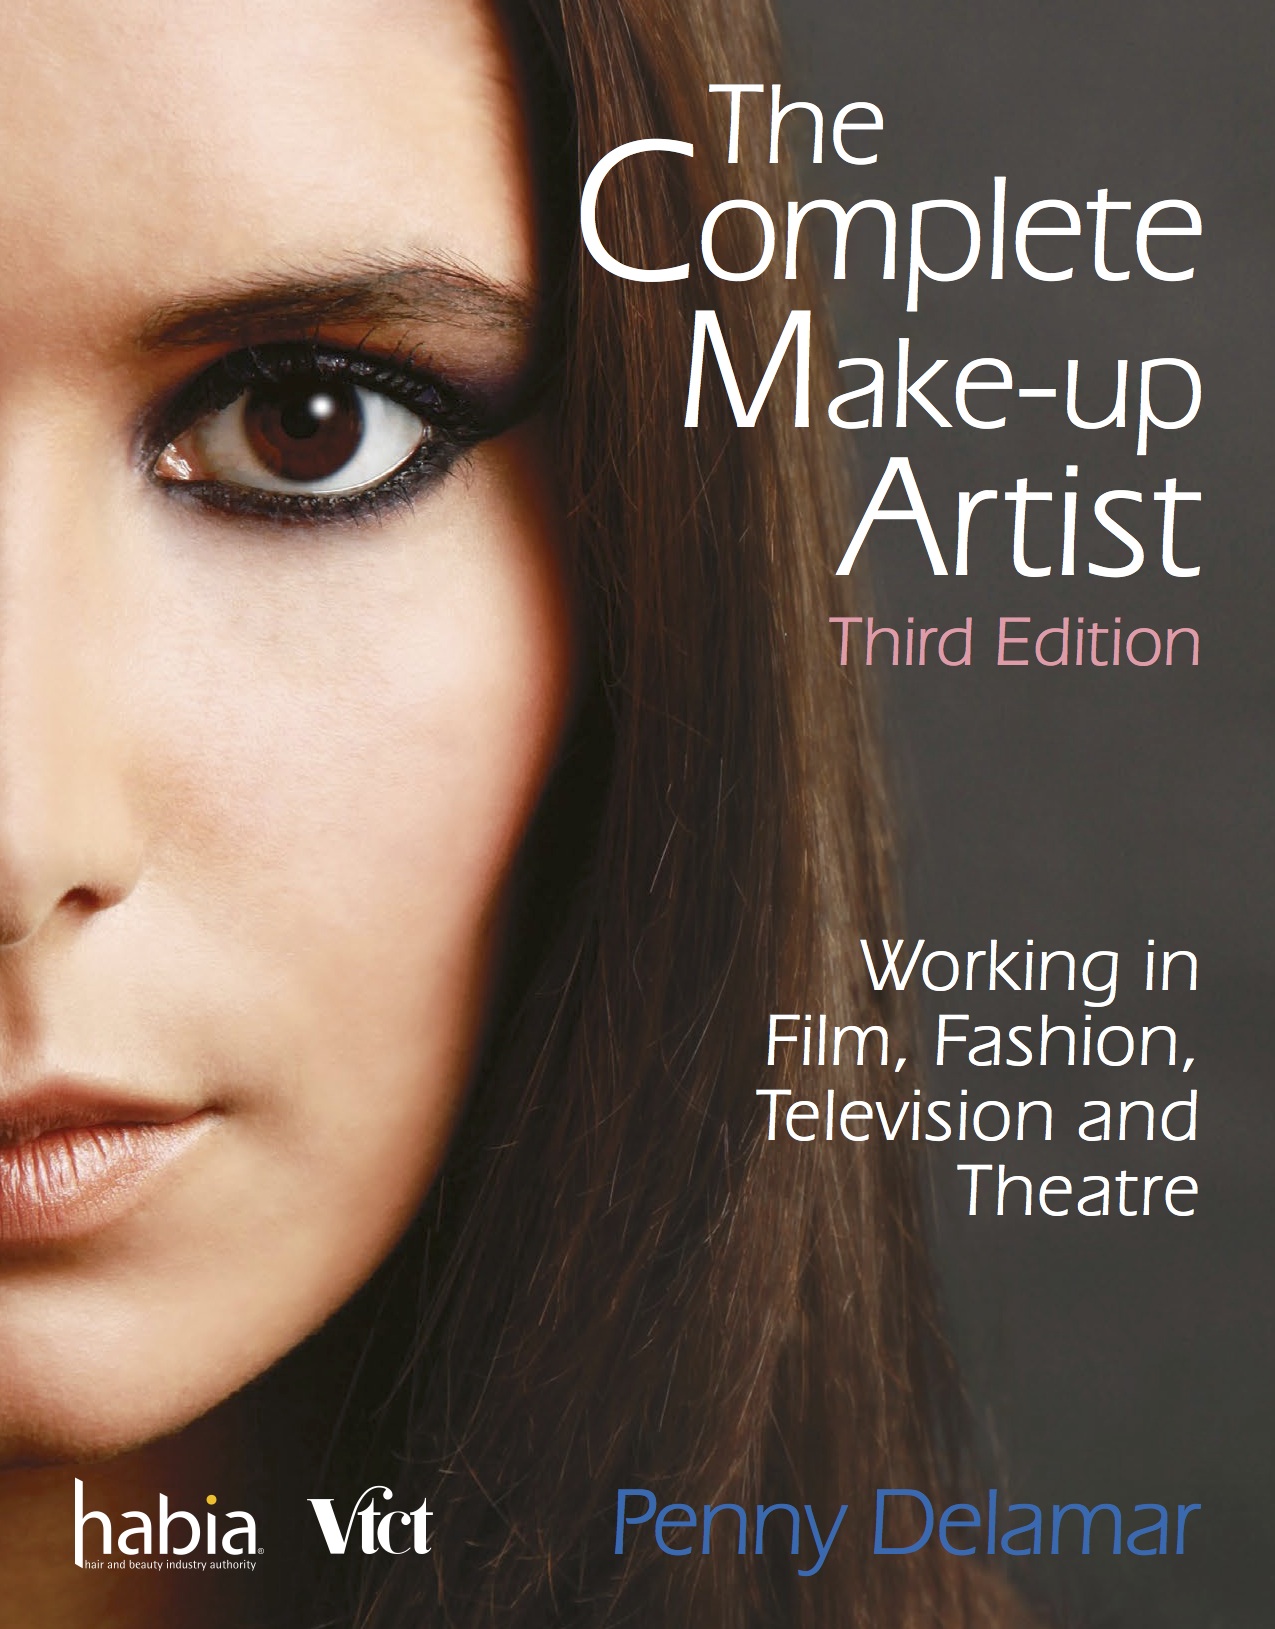 The Complete Make-Up Artist 3rd Edition by Penny Delamar